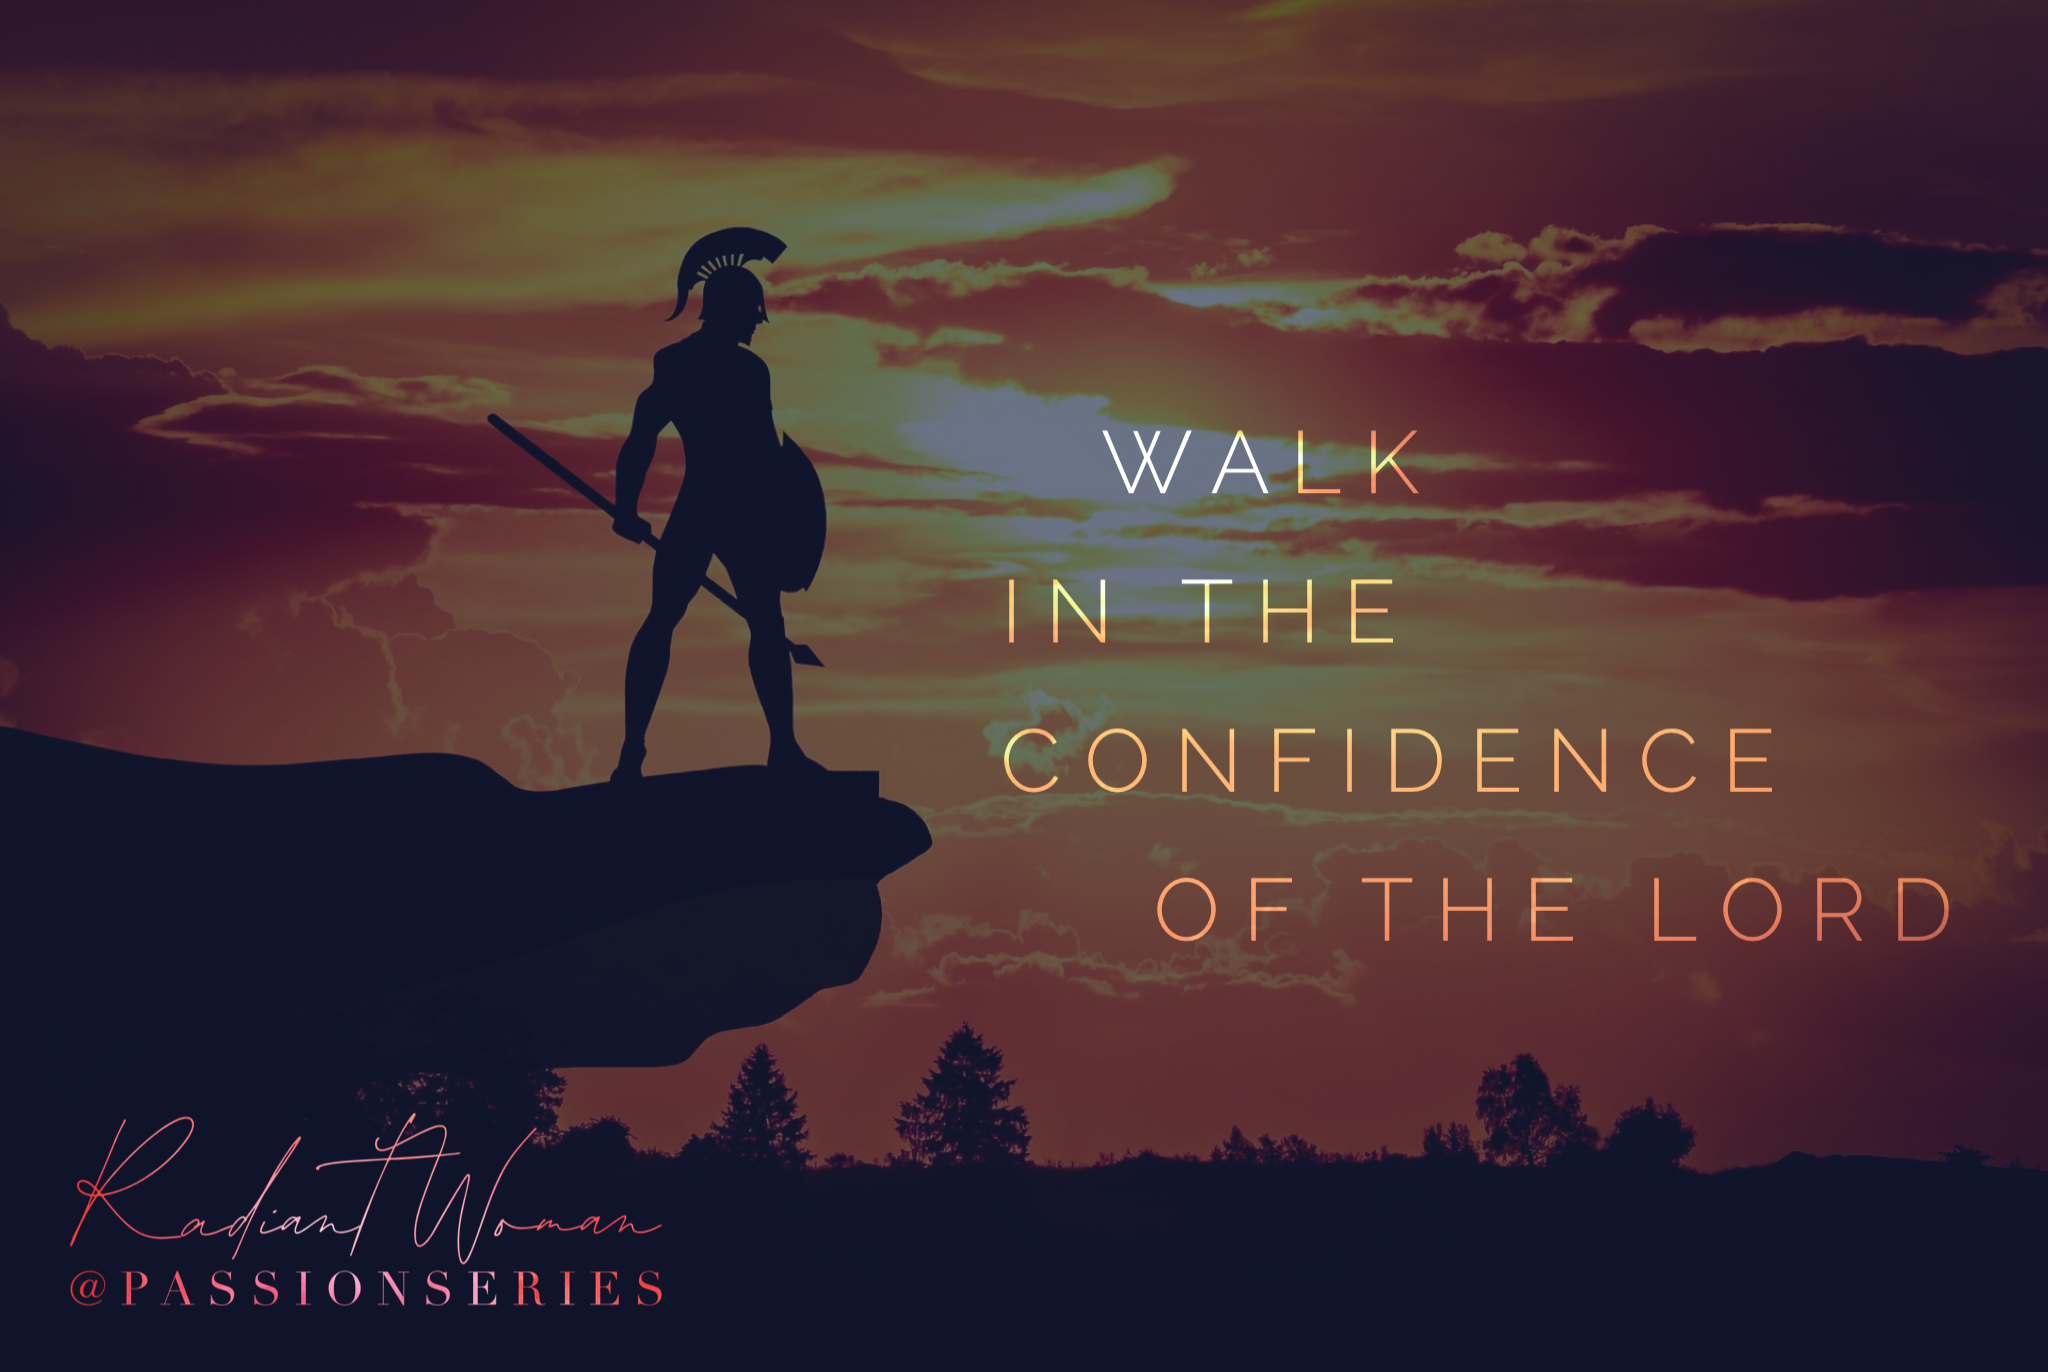 Walk in the Confidence of the Lord